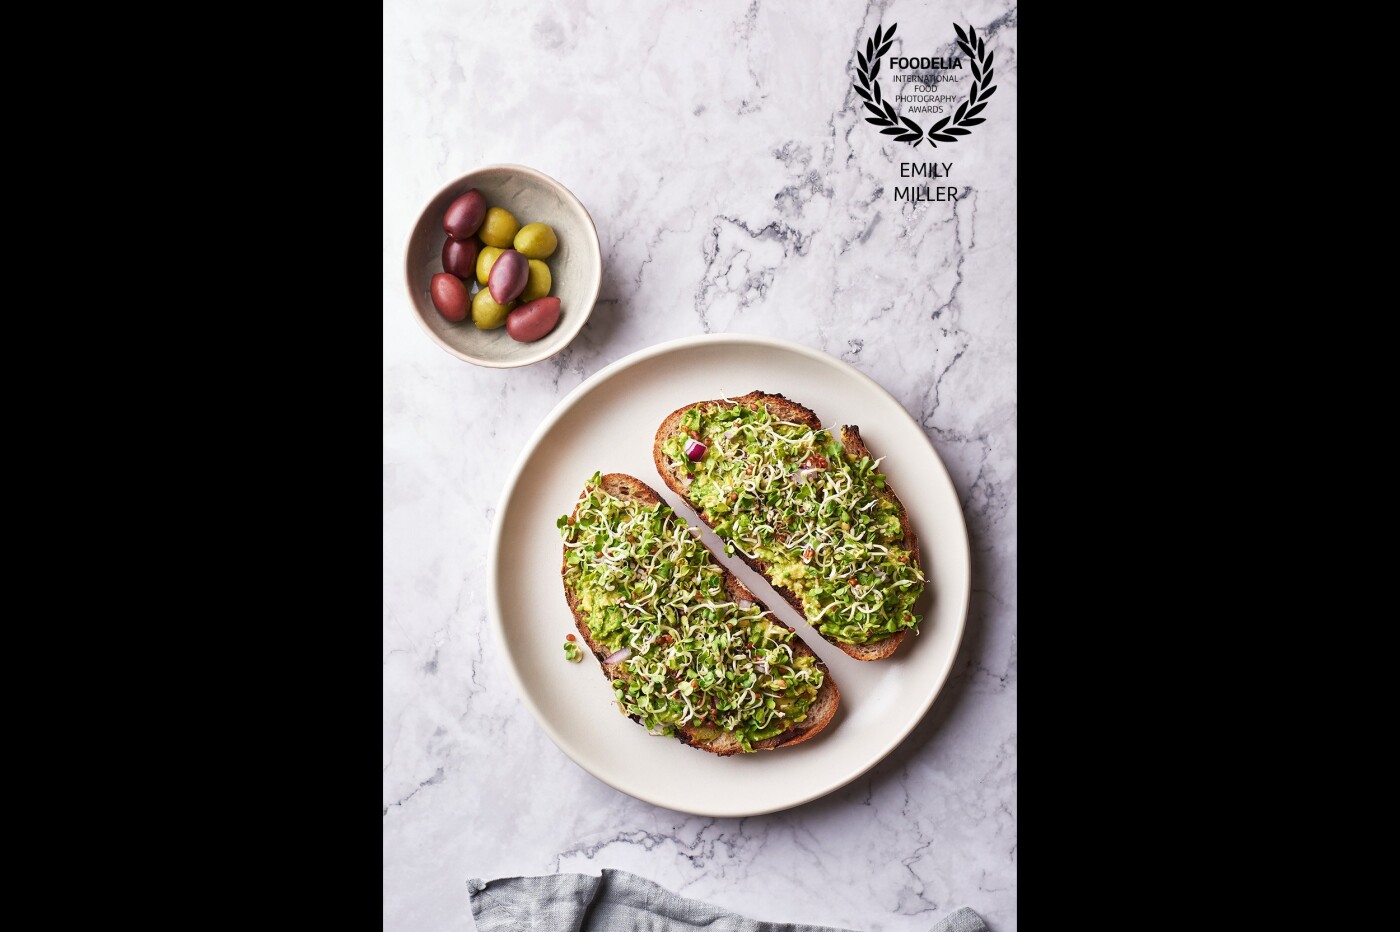 This photo is avocado toast made from homemade olive sourdough bread topped with chopped red onion, sea salt, and homegrown radish sprouts. This top-down shot was taken with artificial light (strobe) at around the 11:00 position.